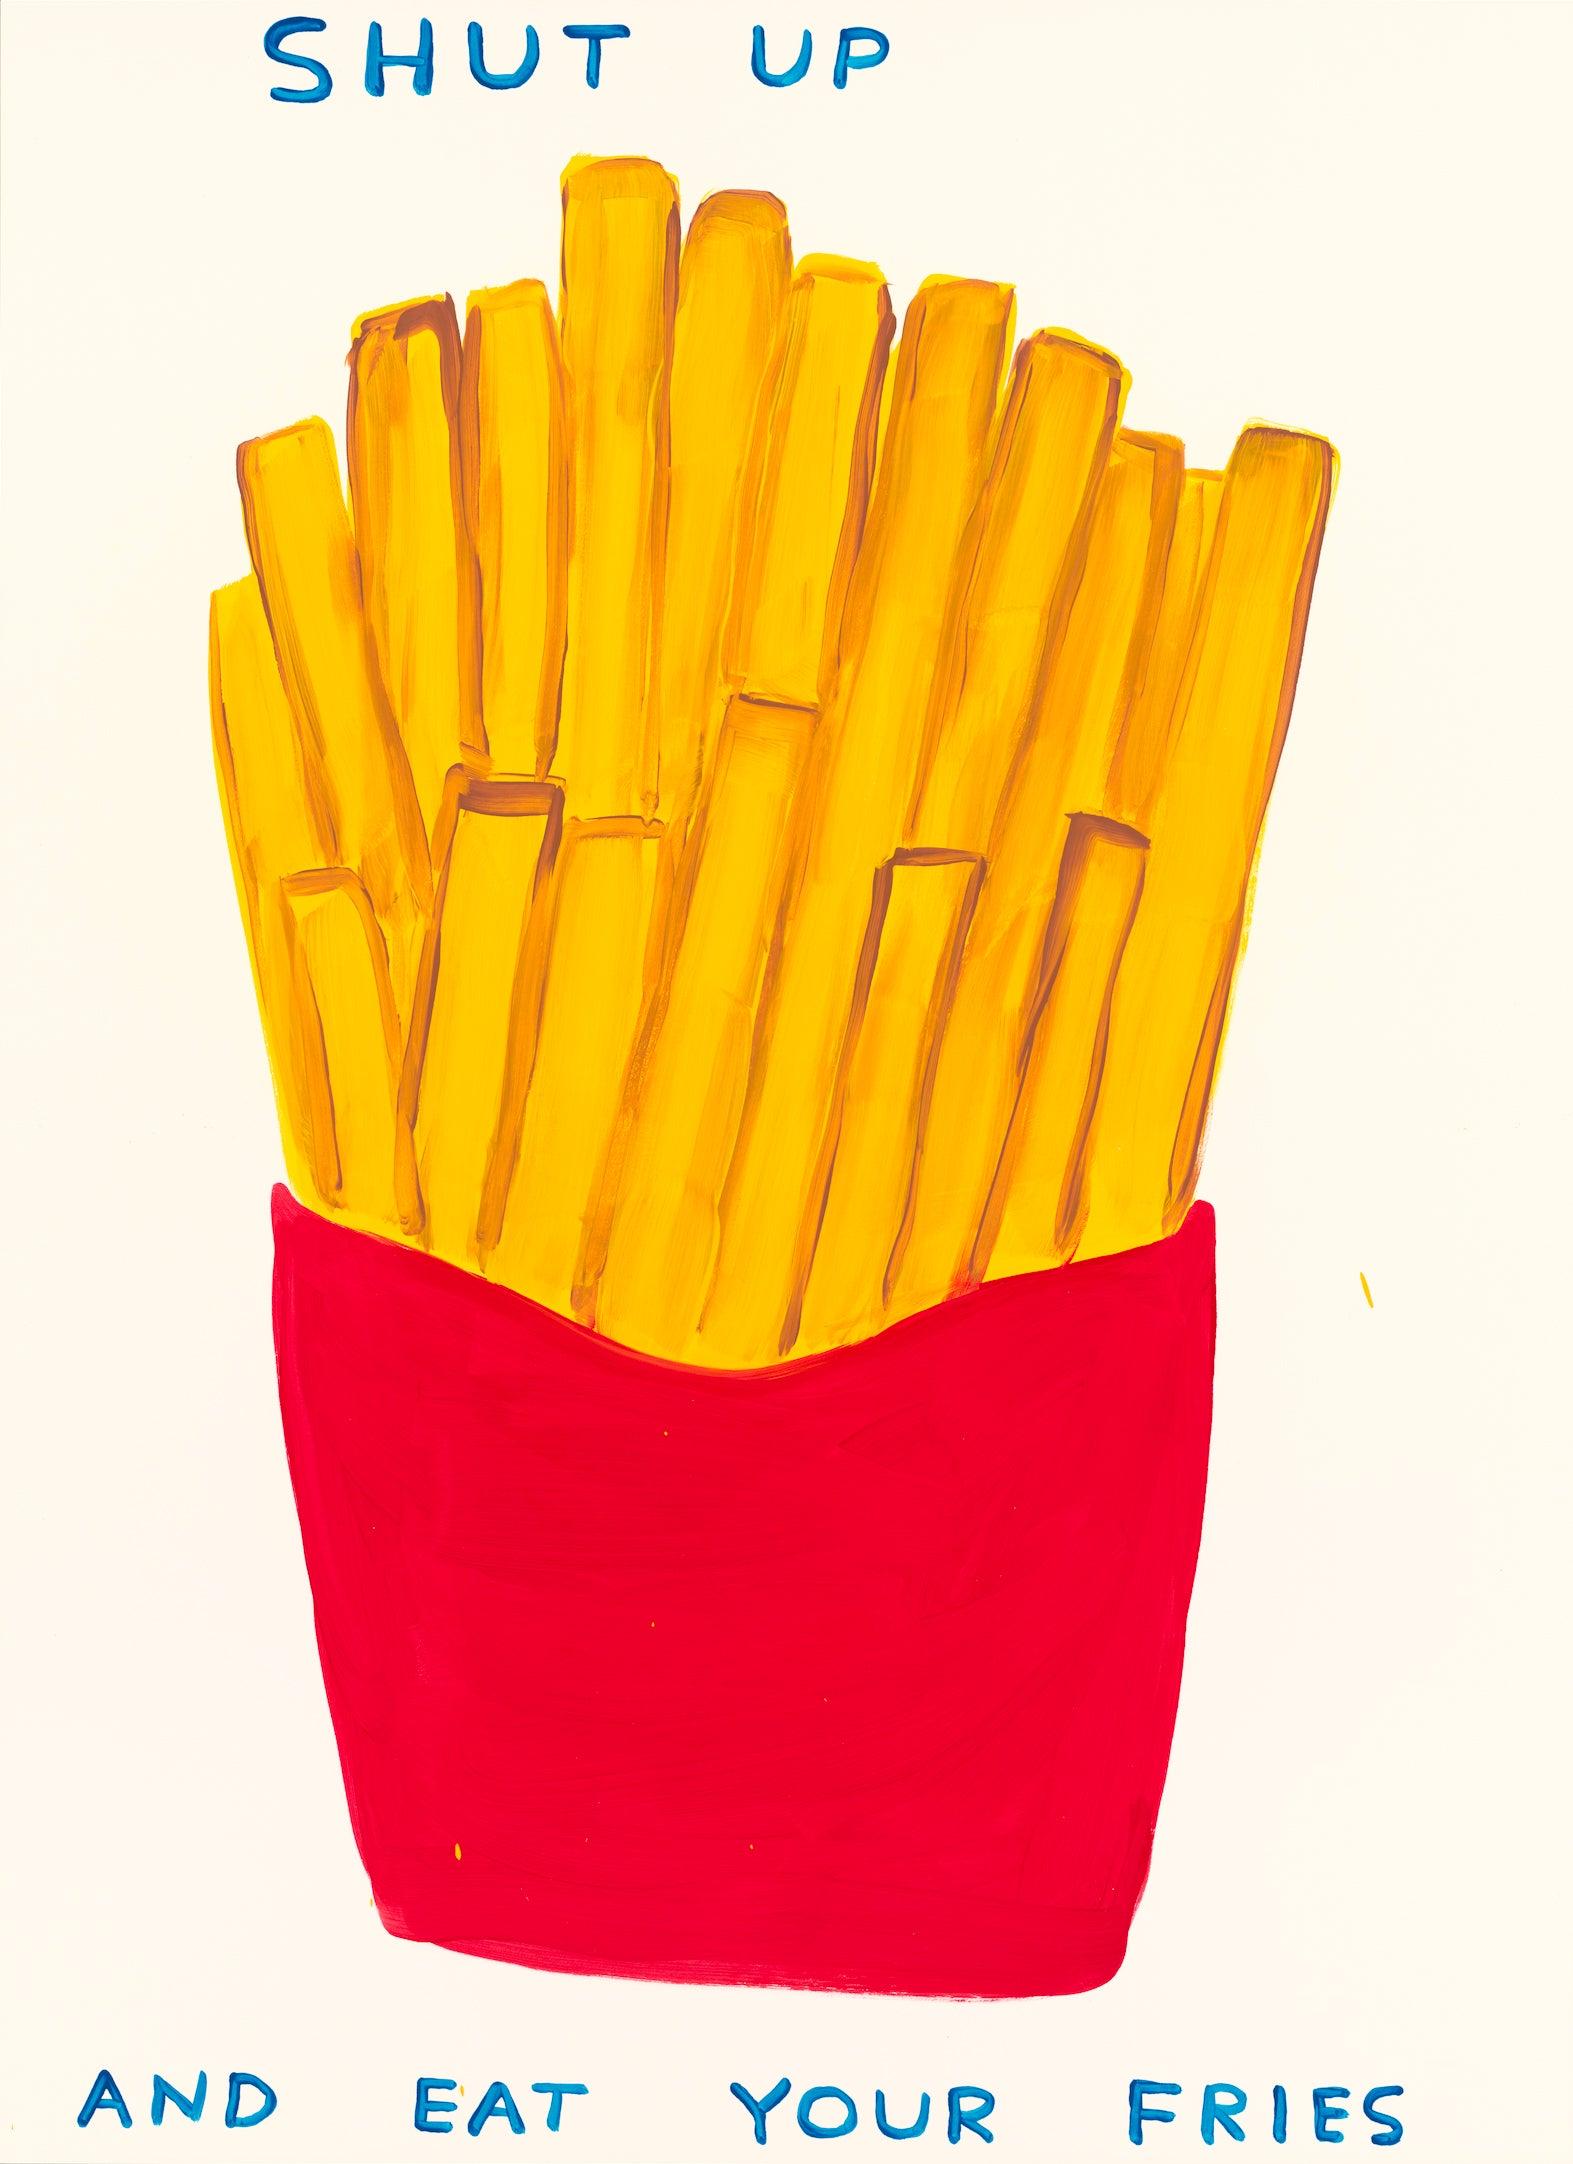 David Shrigley
Shut Up and Eat Your Fries
21 Colour Screenprint on Somerset Tub Sized 410gsm Paper
Edition of 125